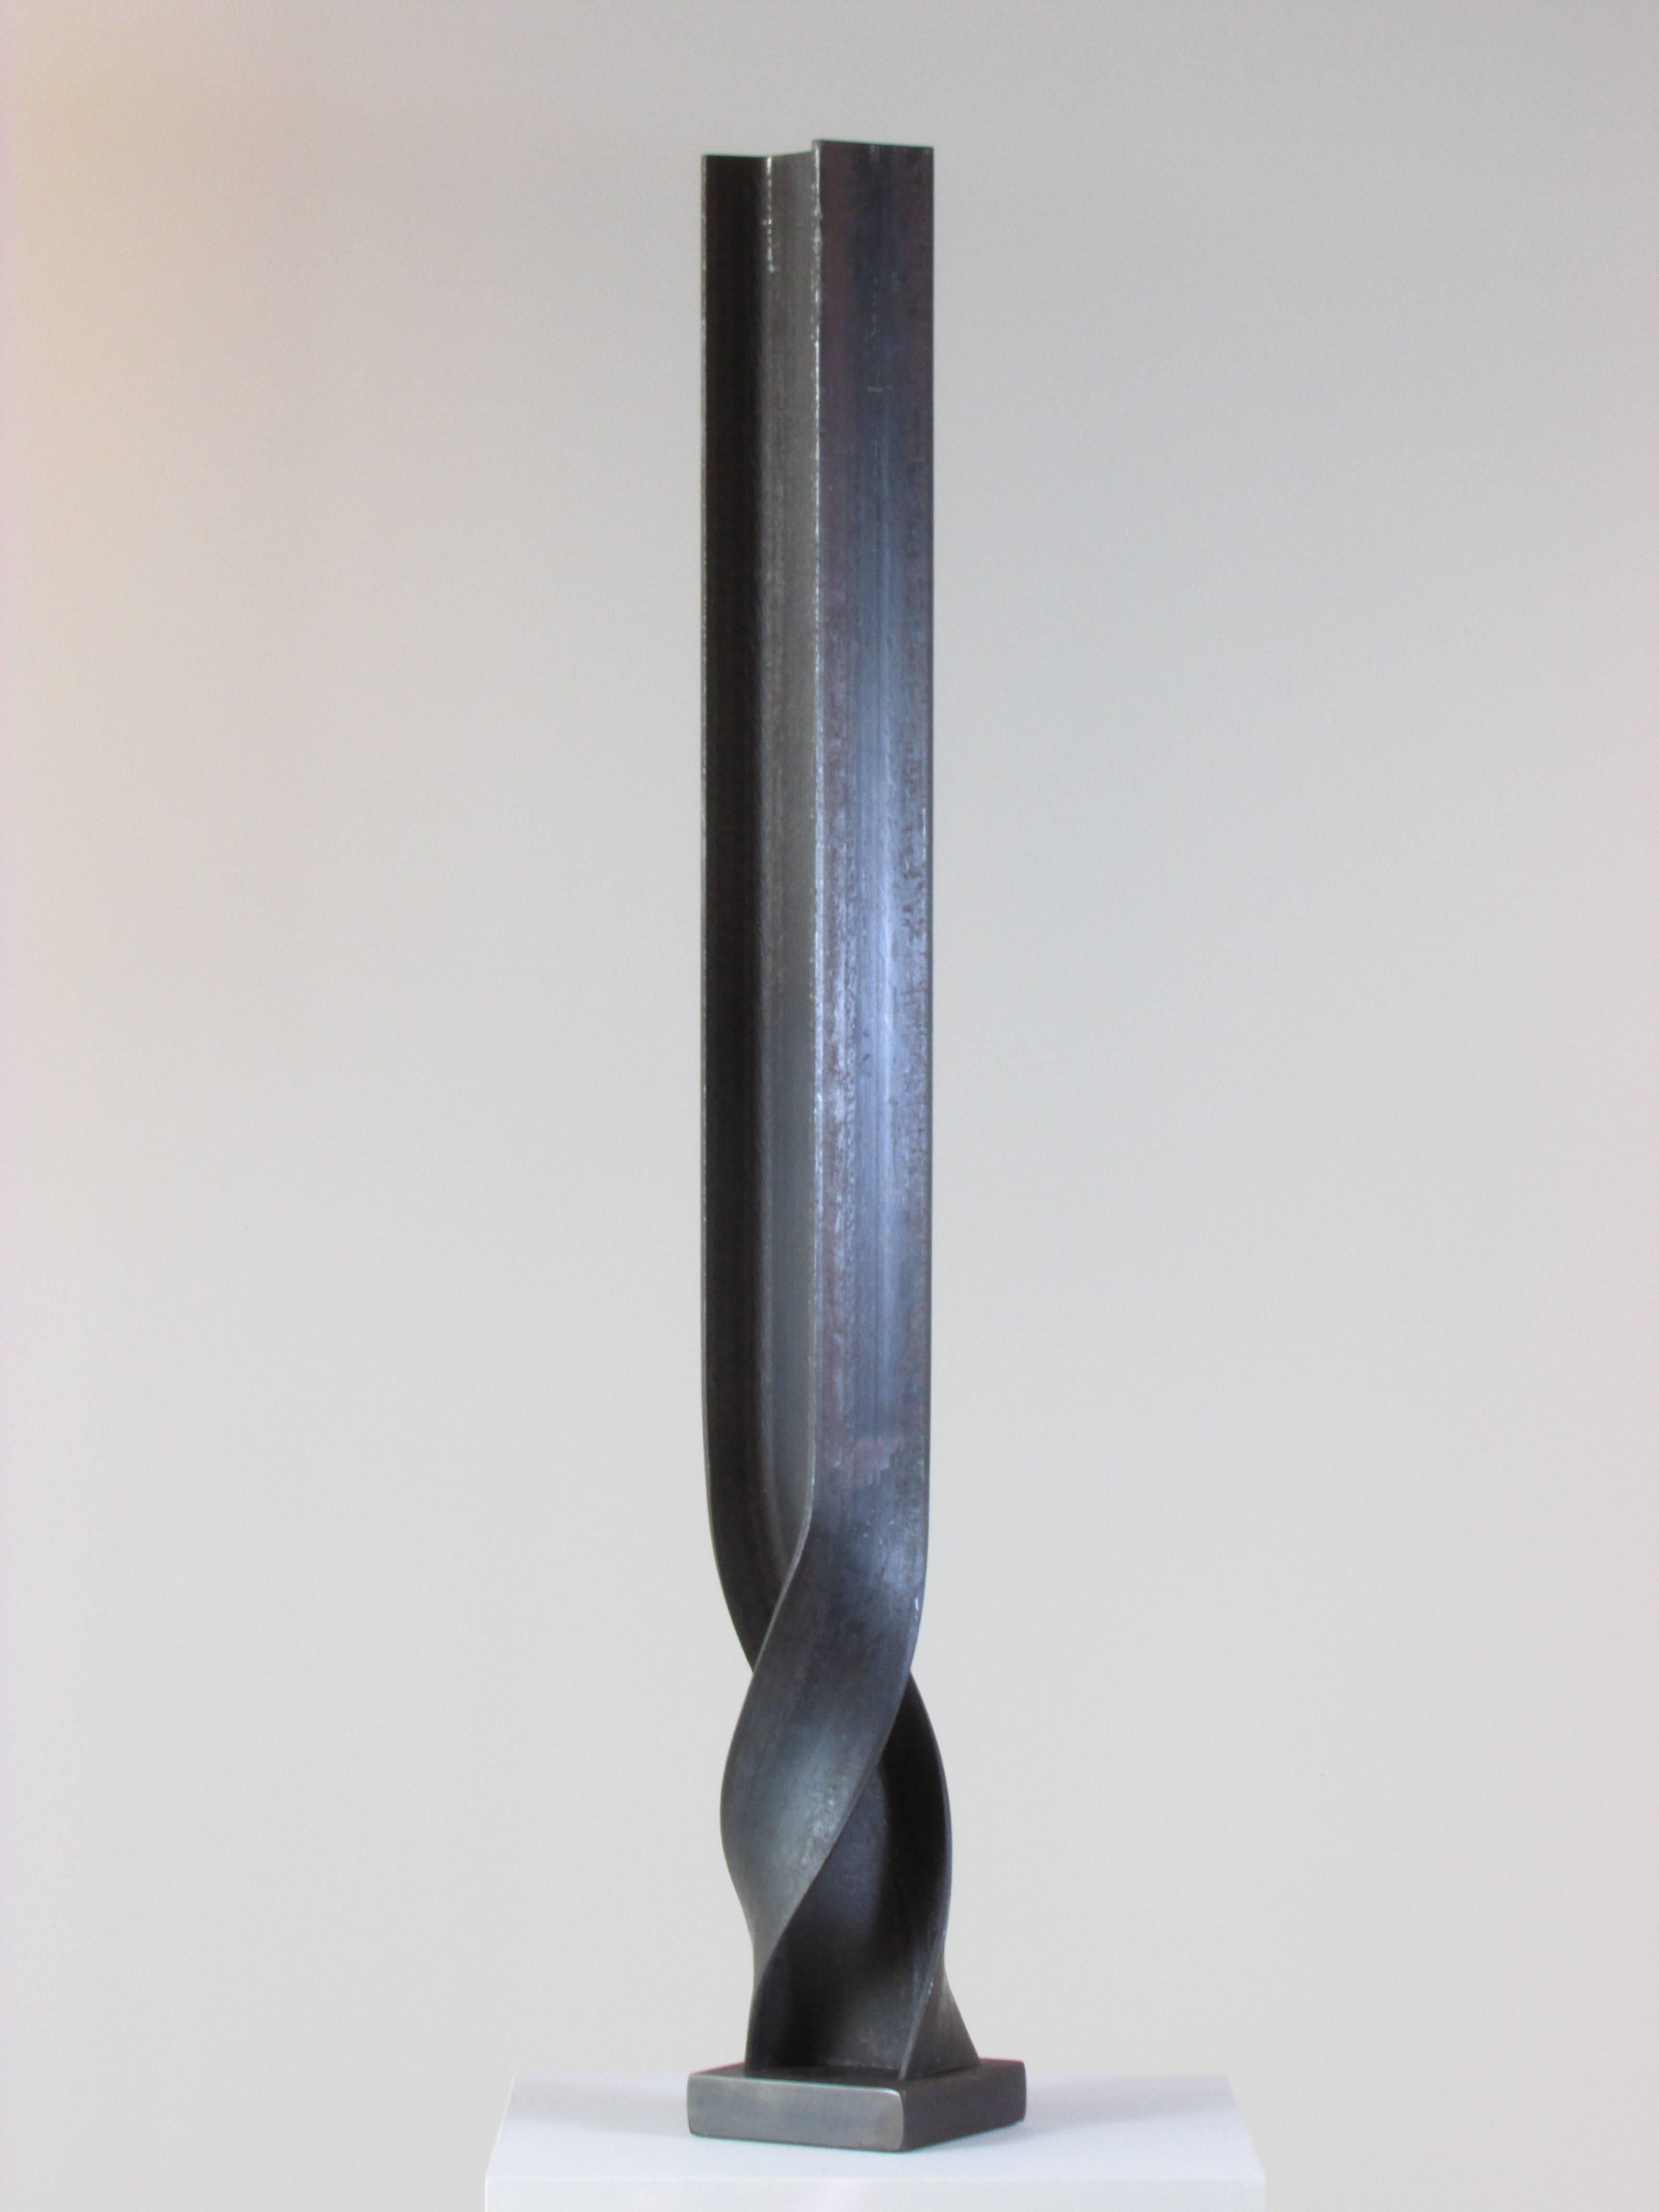 Edwin Salmon, "Chrometid Mutation III", 2016, Steel I Beam, 31.75" x 4" x 4"

"Chrometid Mutation III" is from Edwin Salmon's "Architectural Abstractions" series. Structural steel is the foundation from